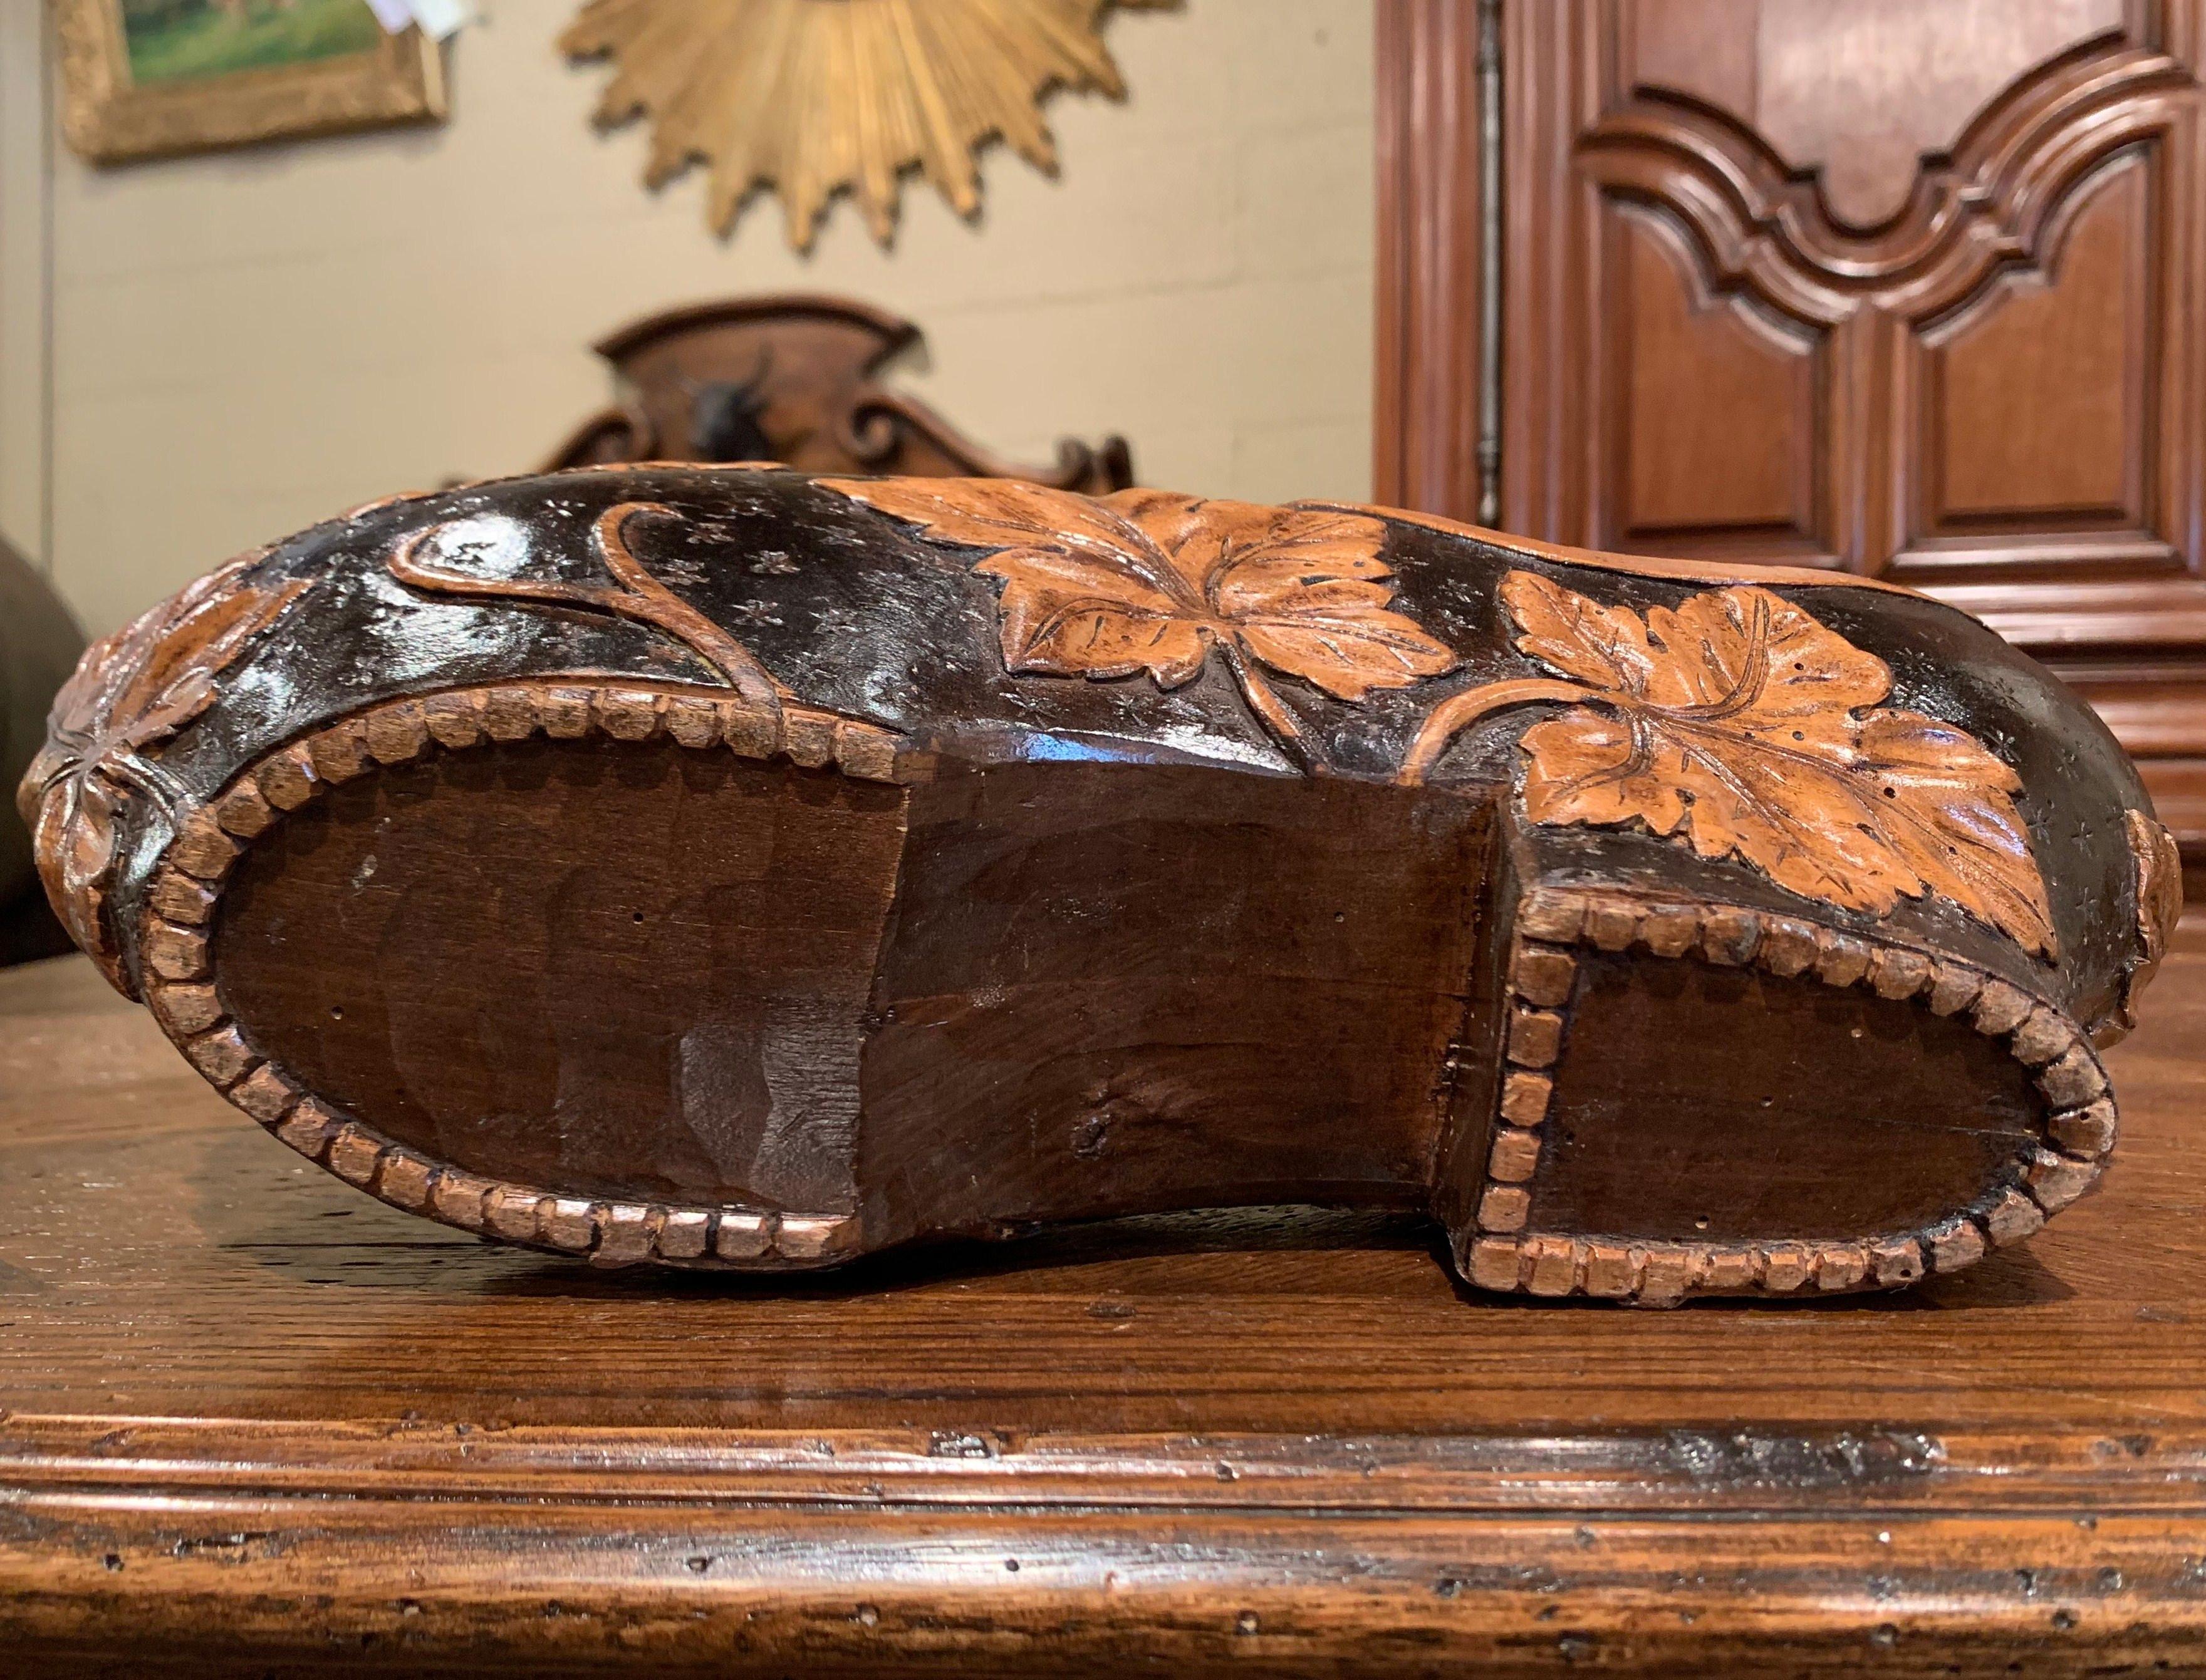 Early 20th Century French Carved Walnut Wine Bottle Holder Clog with Vine Decor For Sale 3